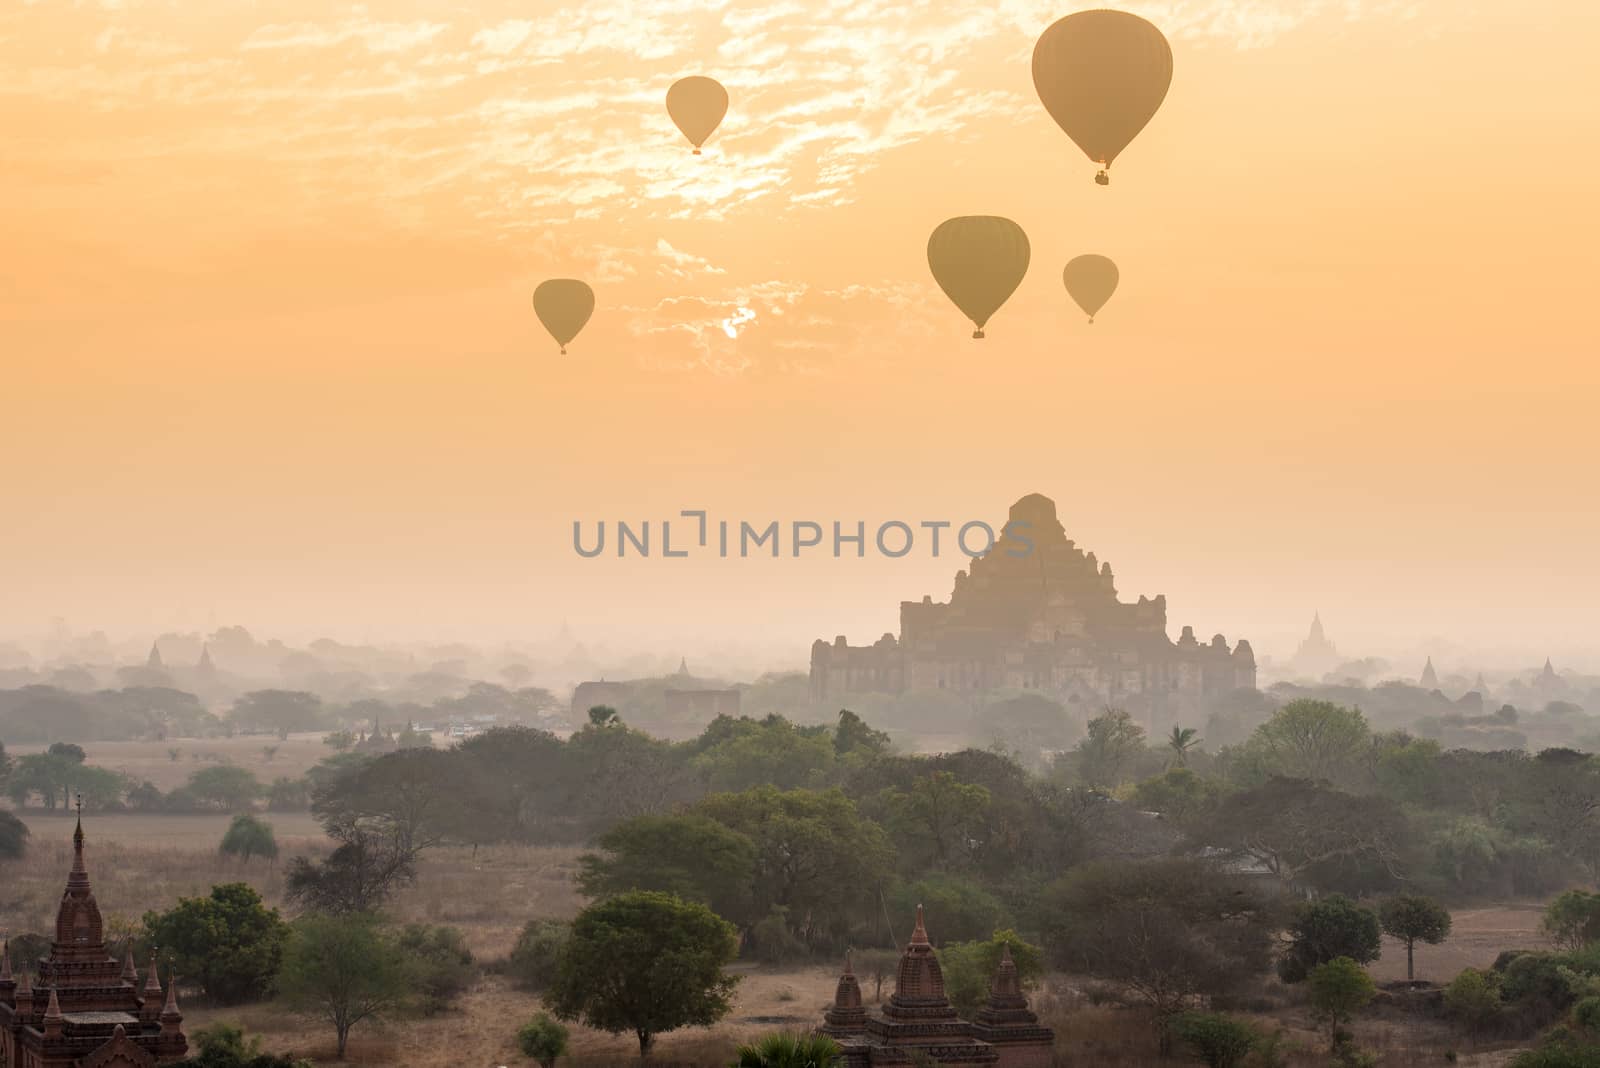 Dhammayangyi temple The biggest Temple in Bagan with balloons an by t0pkul3